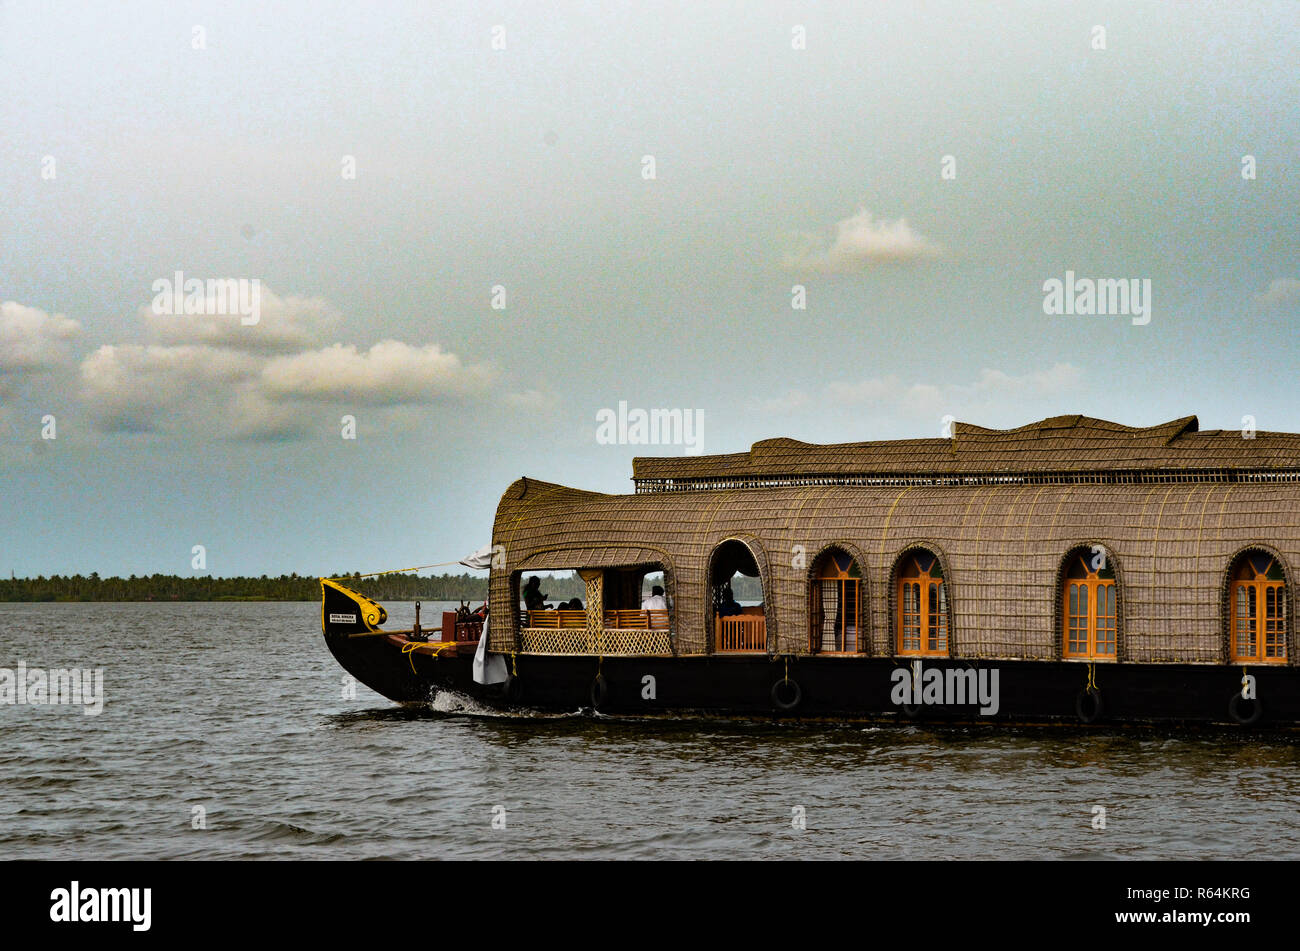 Beautiful view of houseboat in Alleppey (Alappuzha) backwaters in Kerala, India. Shot against background of blue sky and  backwaters. Stock Photo